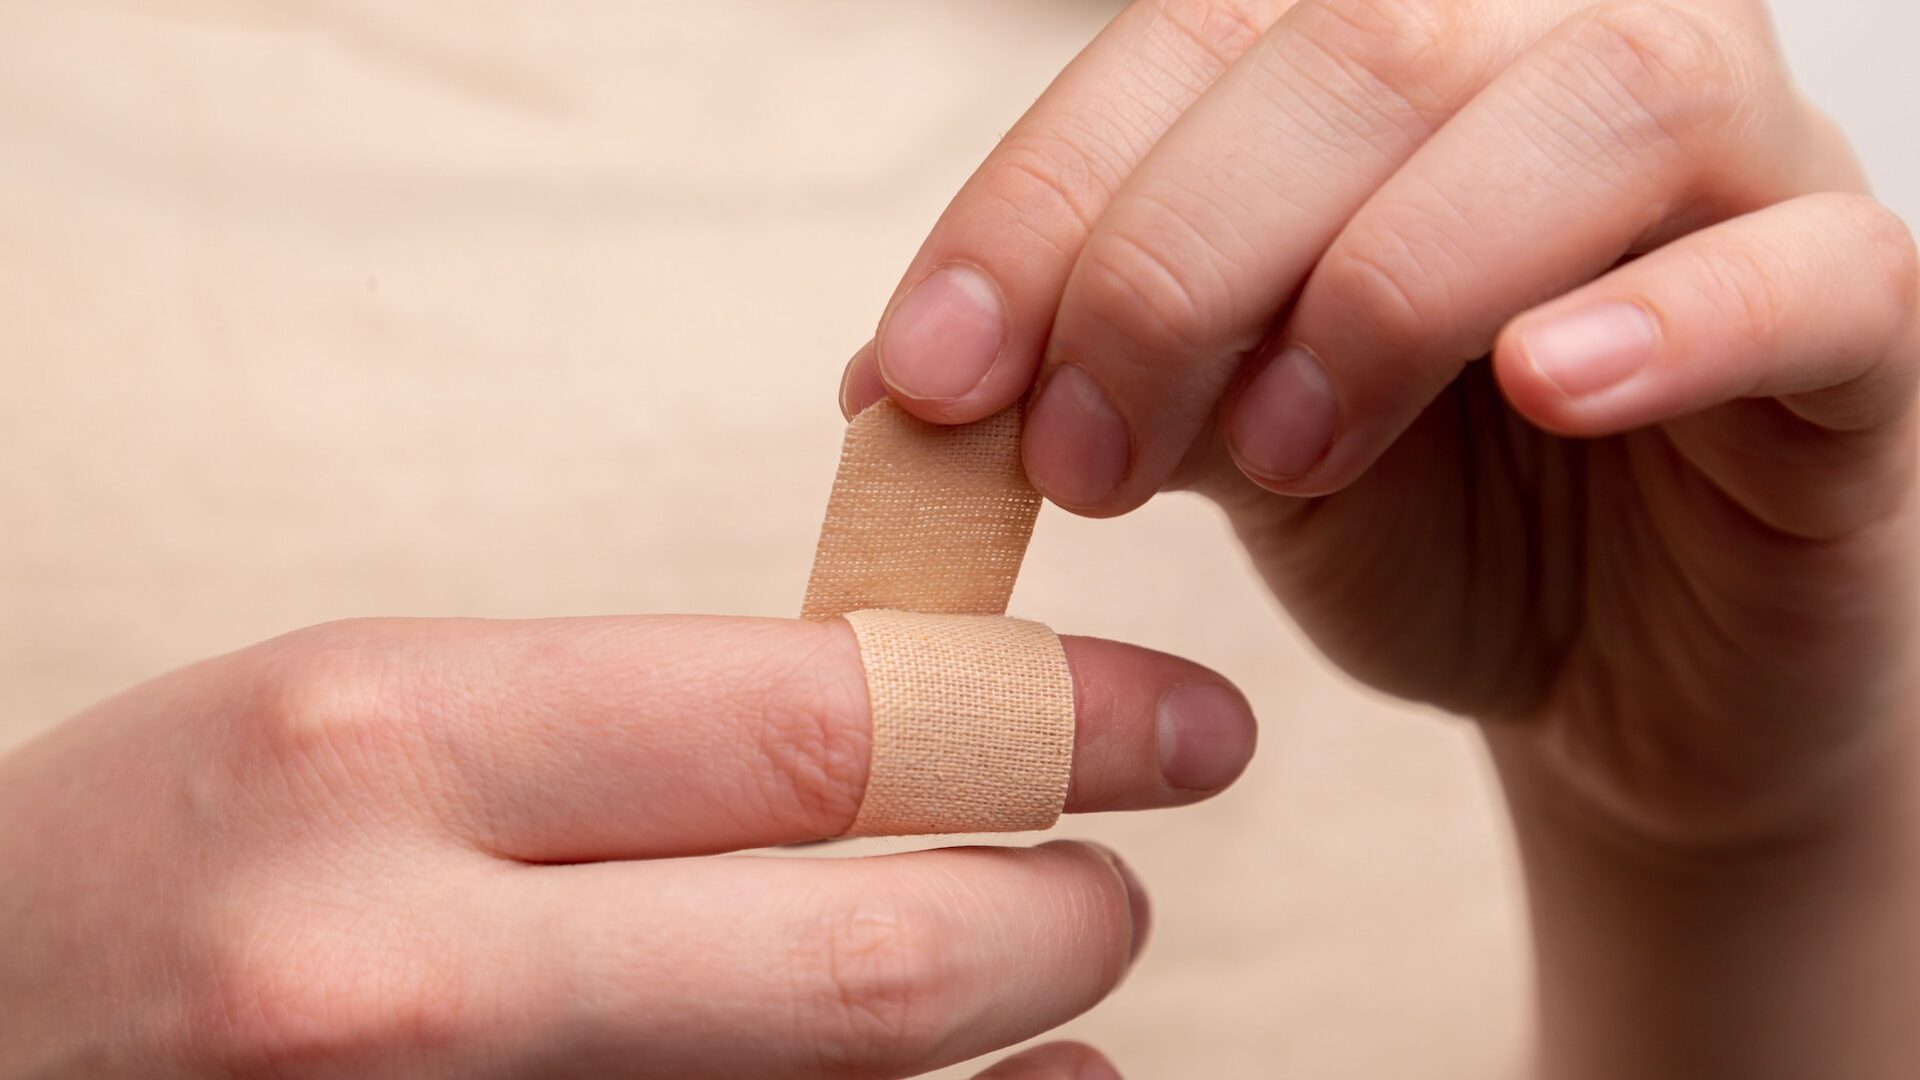 Trigger Finger: What Is, Causes, Symptoms, Diagnosis, and Rehabilitation